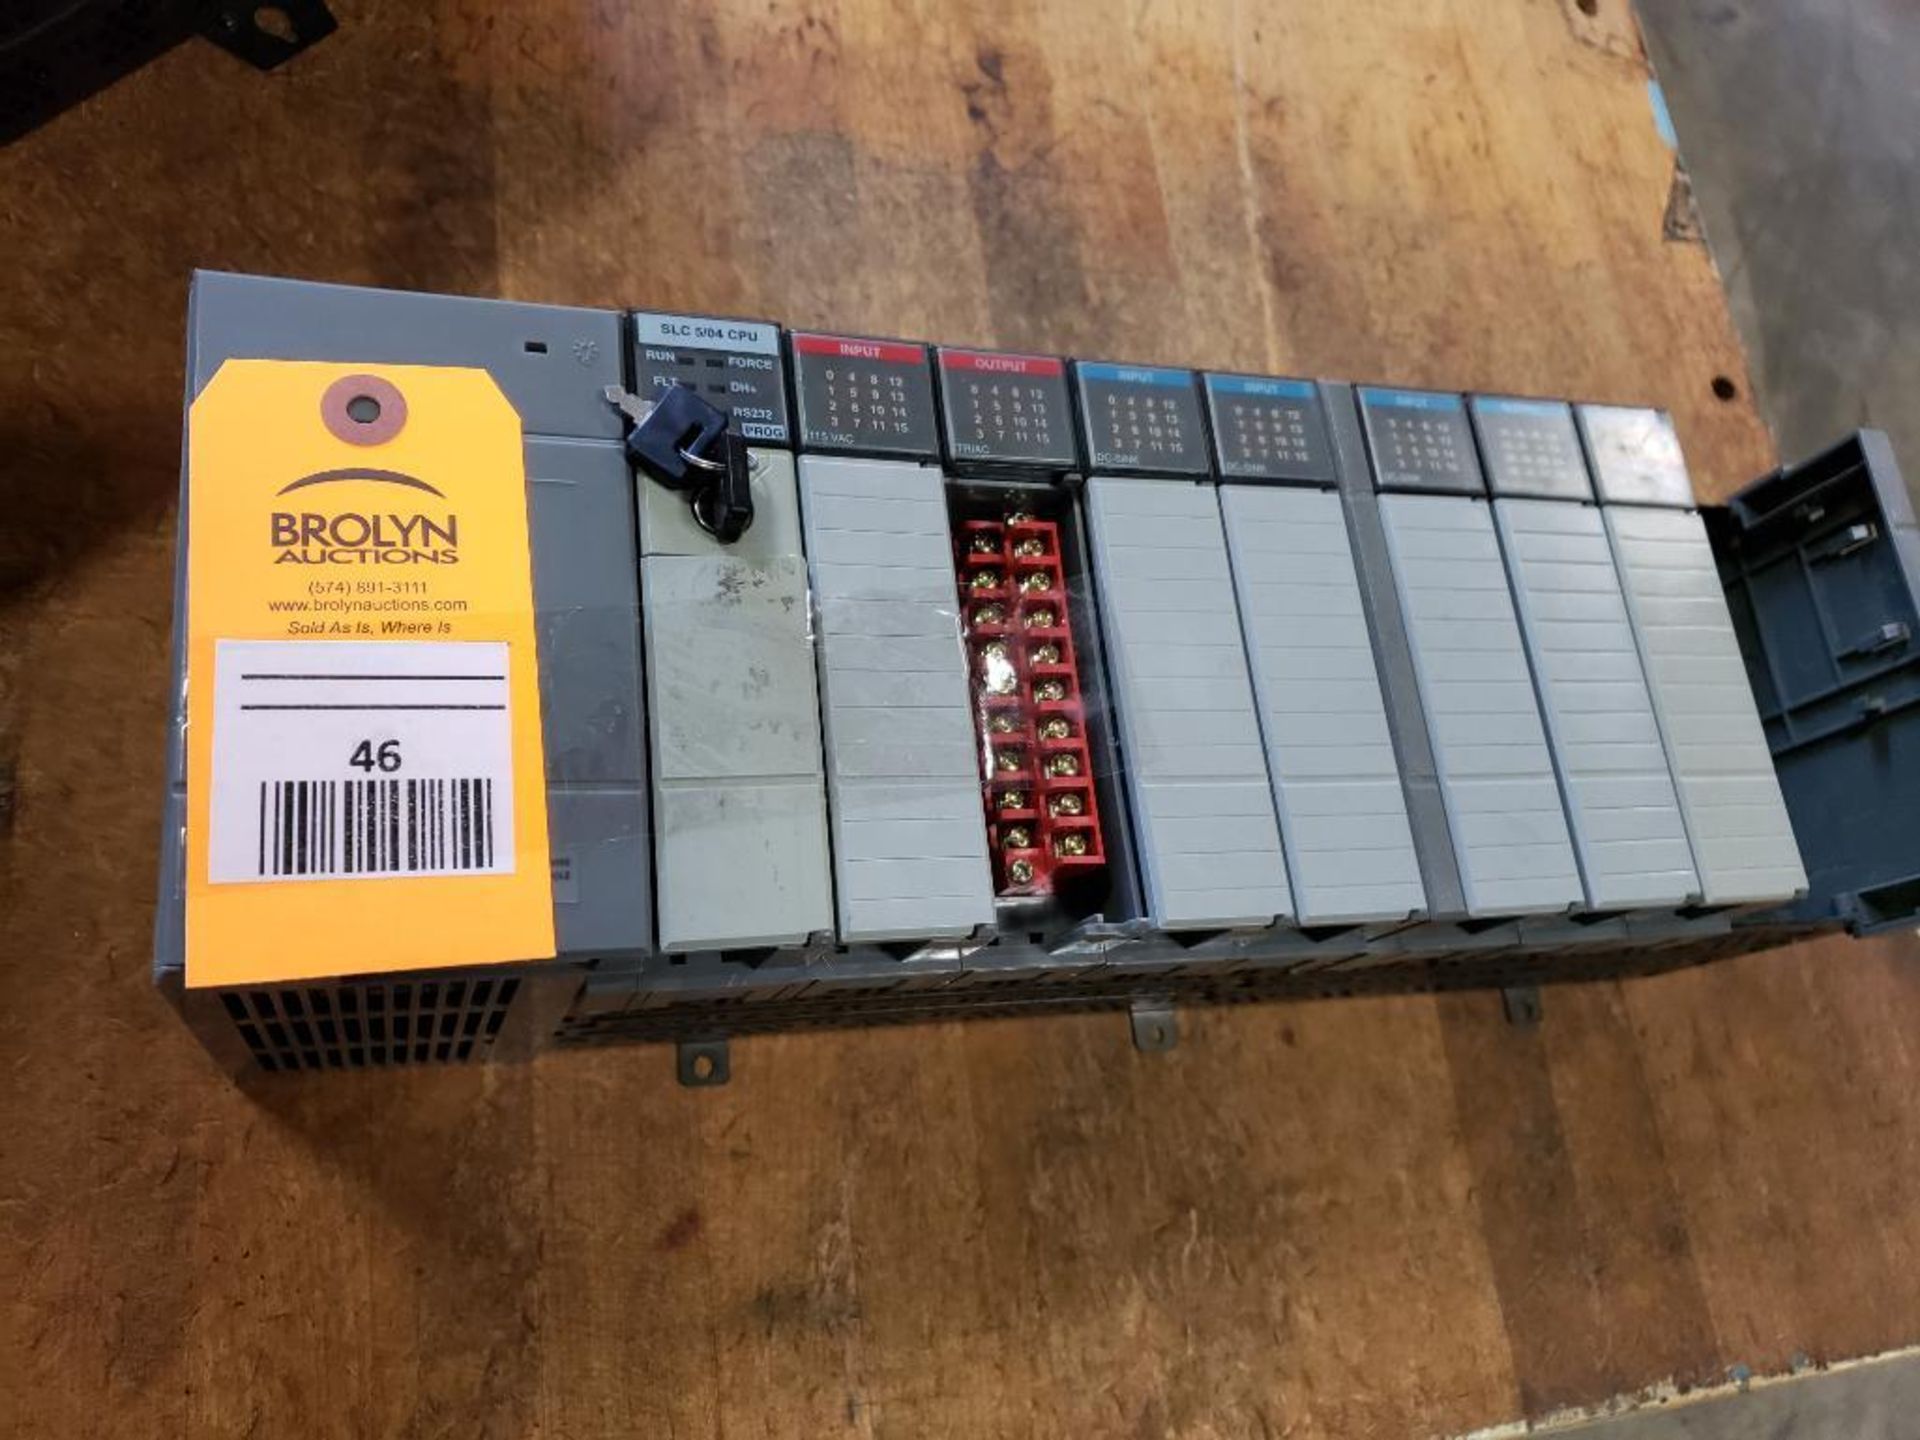 Allen Bradley SLC 5/04 Keyed CPU and controller 10-slot rack with power supply.